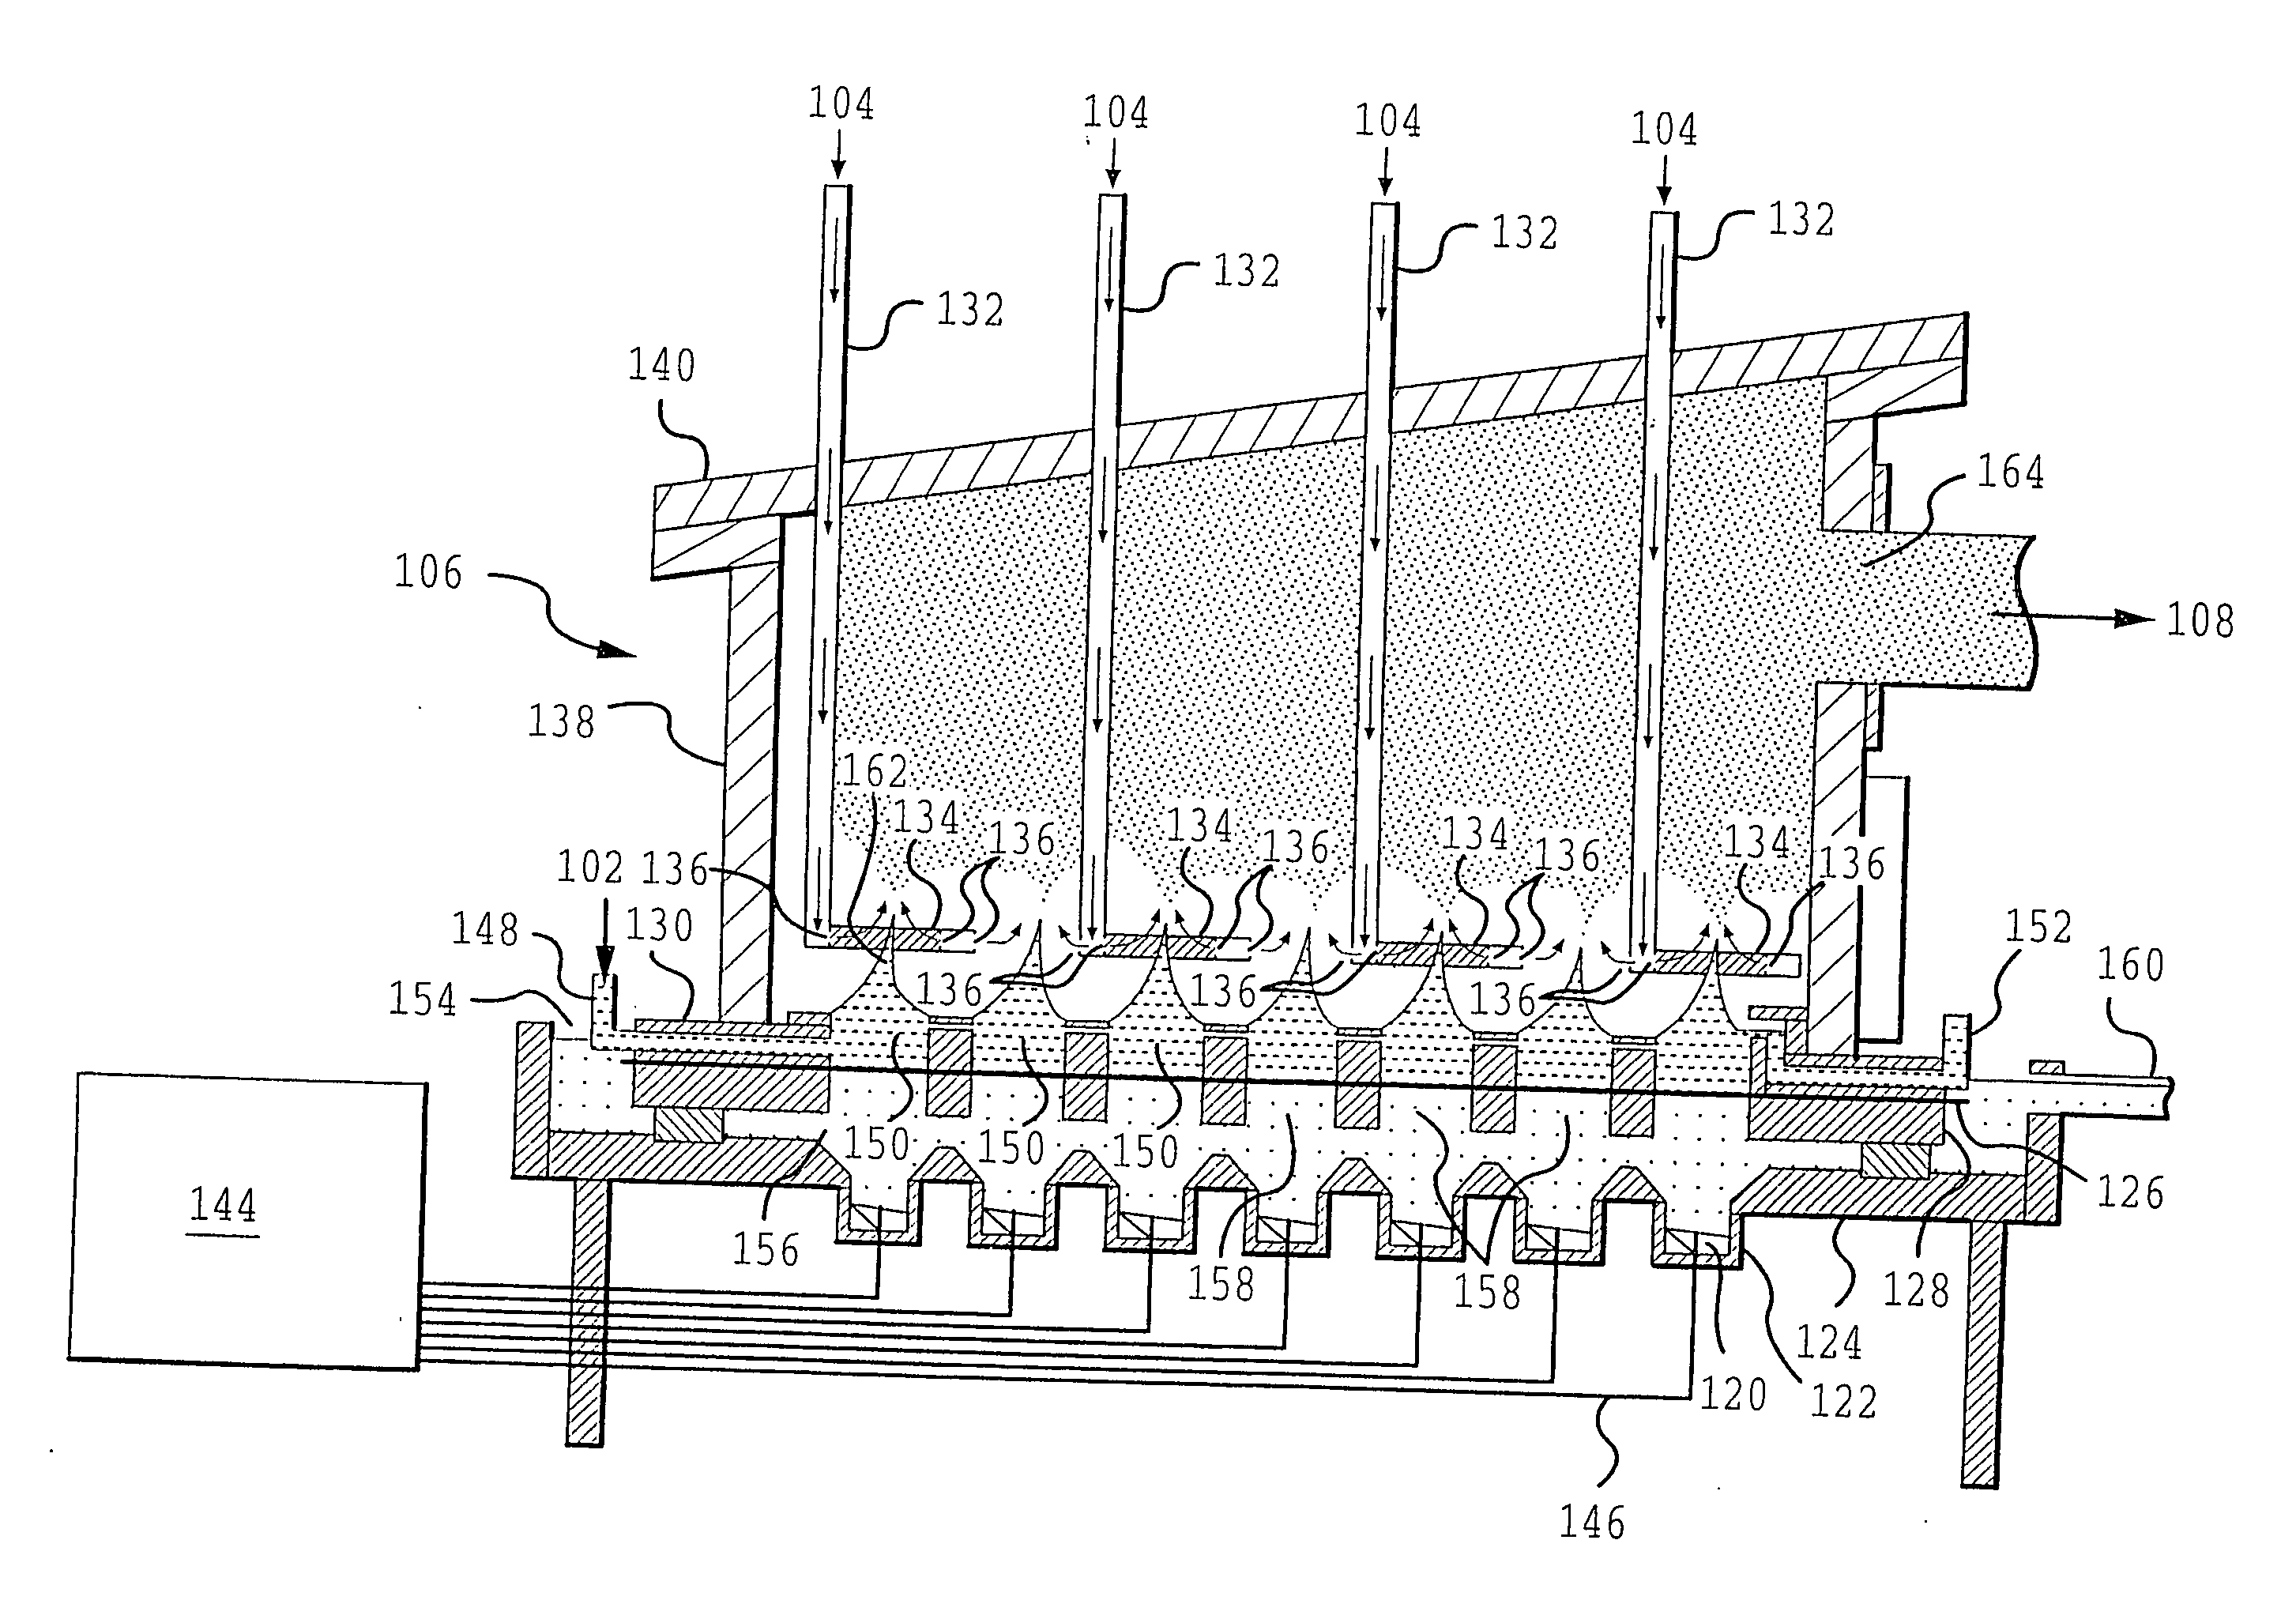 Coated silver-containing particles, method and apparatus of manufacture, and silver-containing devices made therefrom